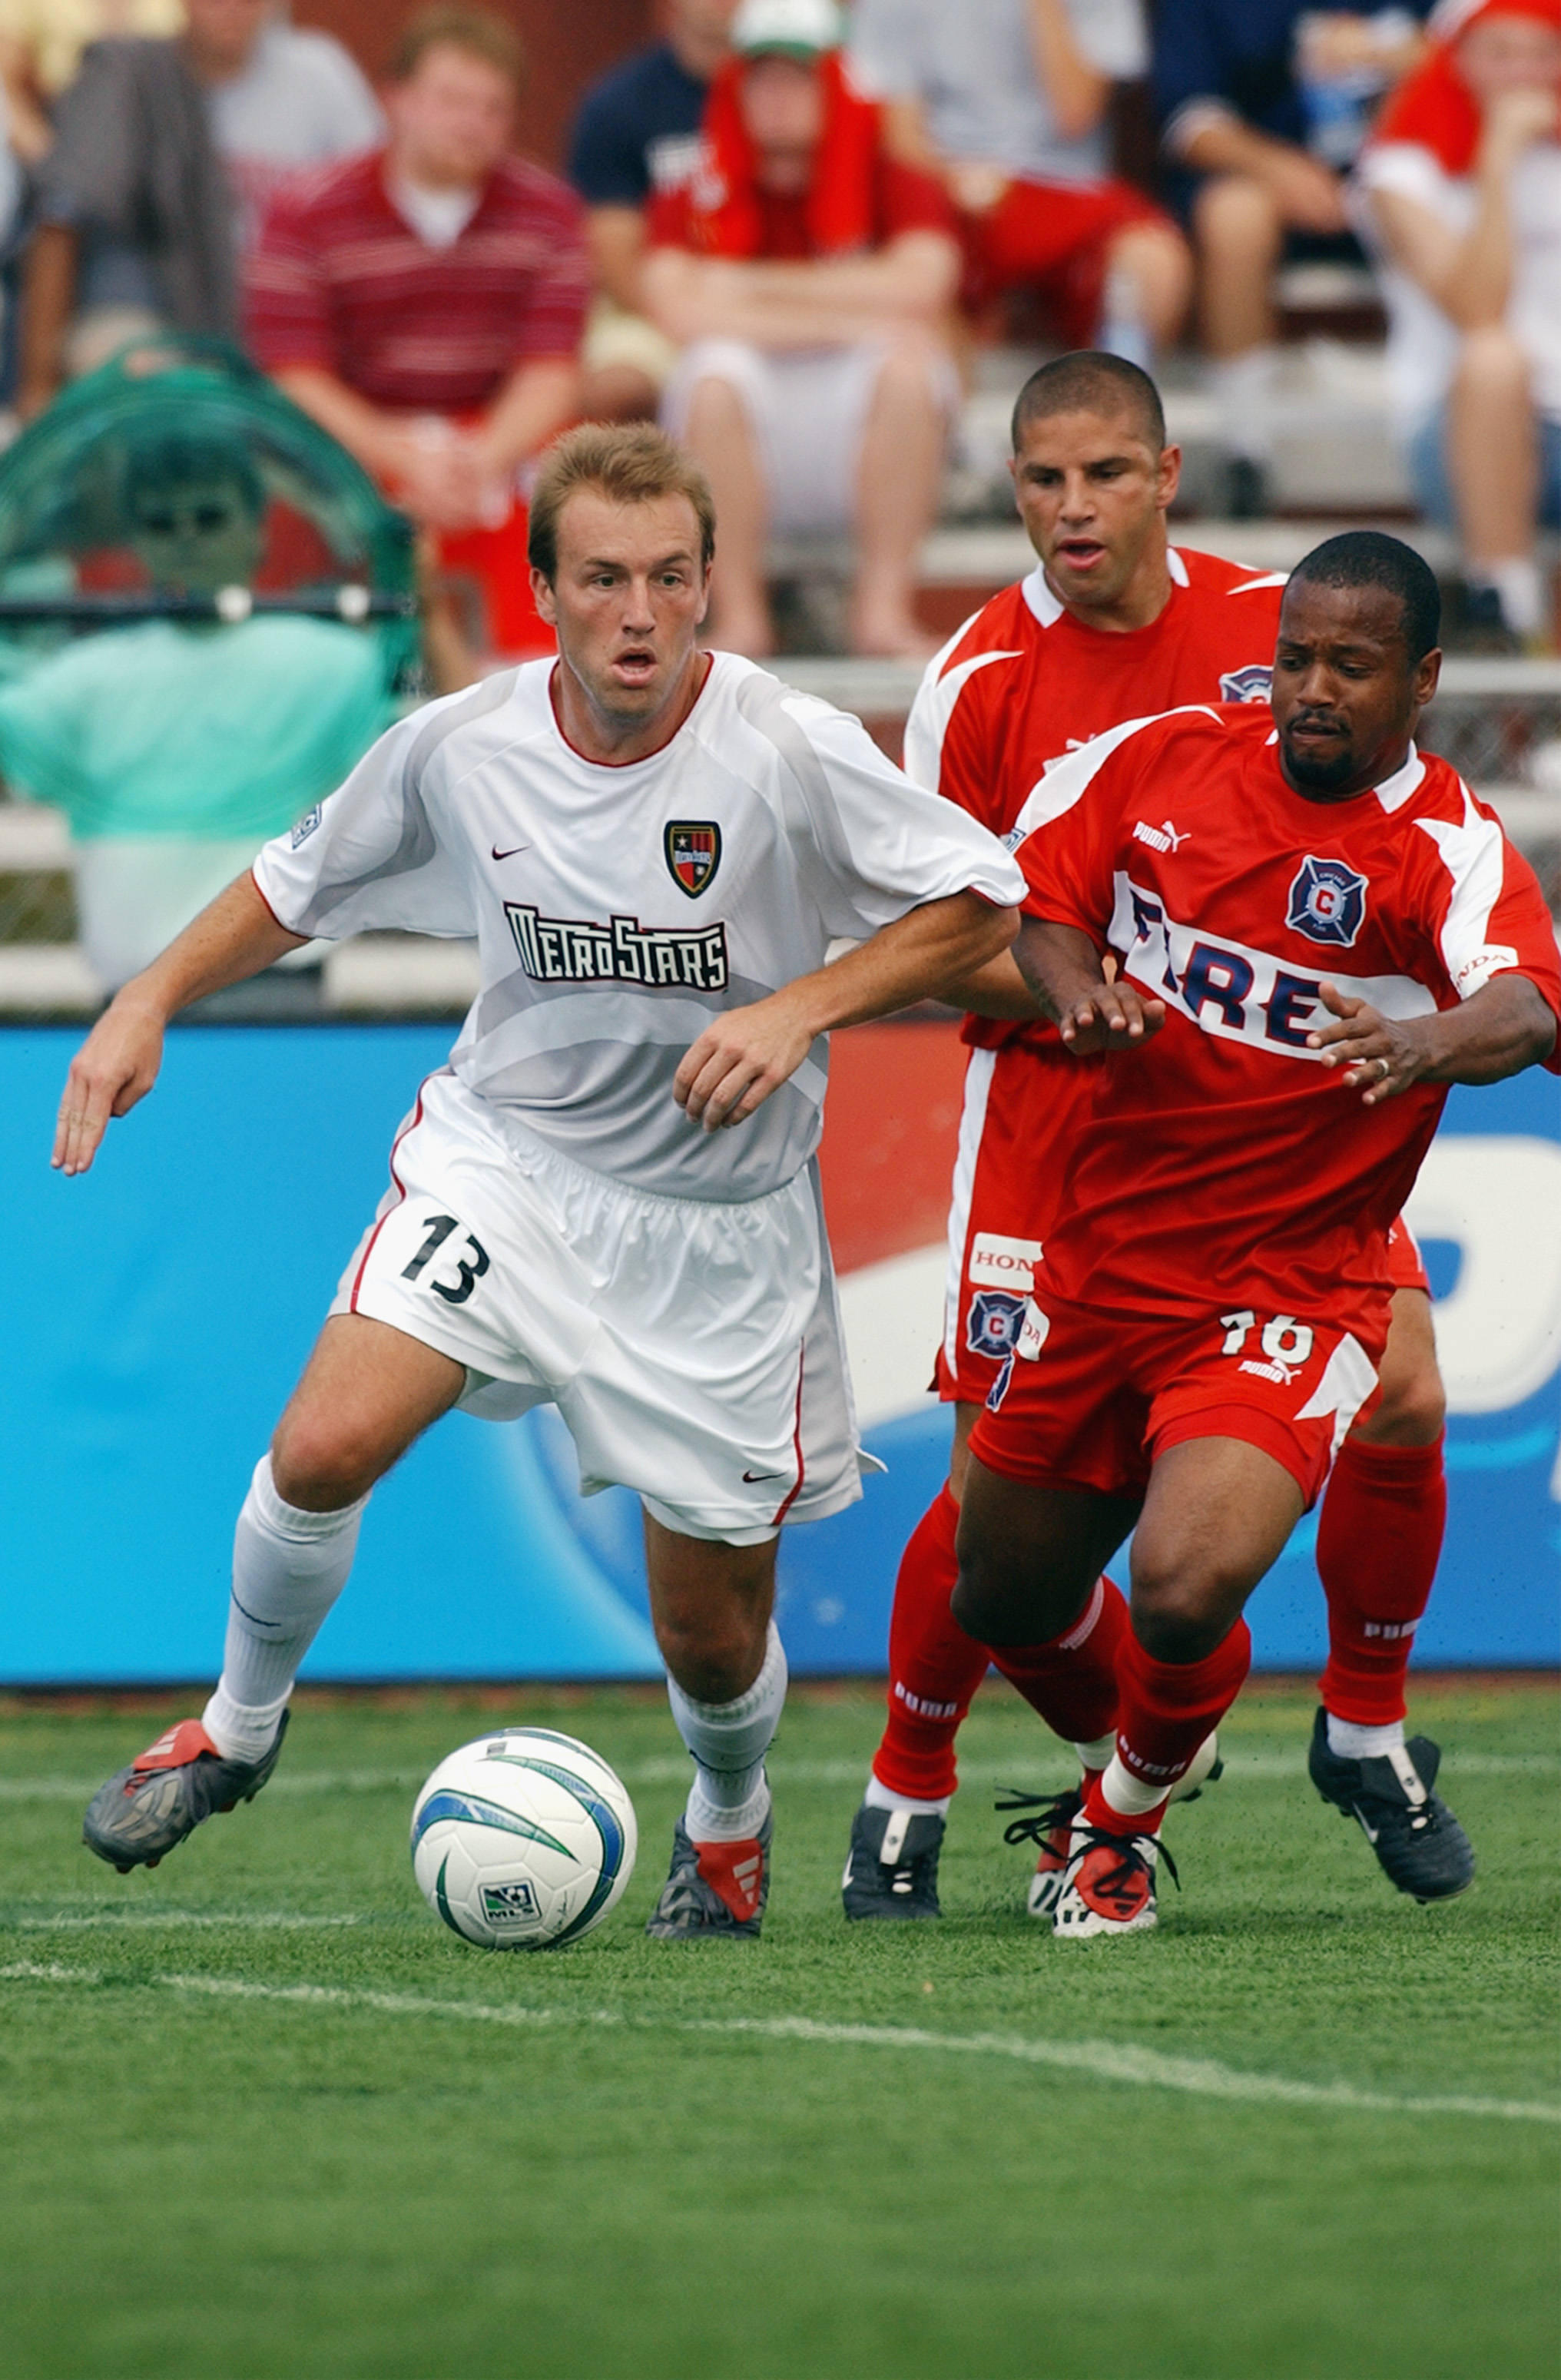 NAPERVILLE, IL - JUNE 28:  Andy Williams #16 of the Chicago Fire defends Clint Mathis #13 of the NY/NJ MetroStars during their MLS game on June 28, 2003 at Cardinal Stadium in Naperville, Illinois. The Fire defeated the MetroStars 2-1 in overtime. (Photo